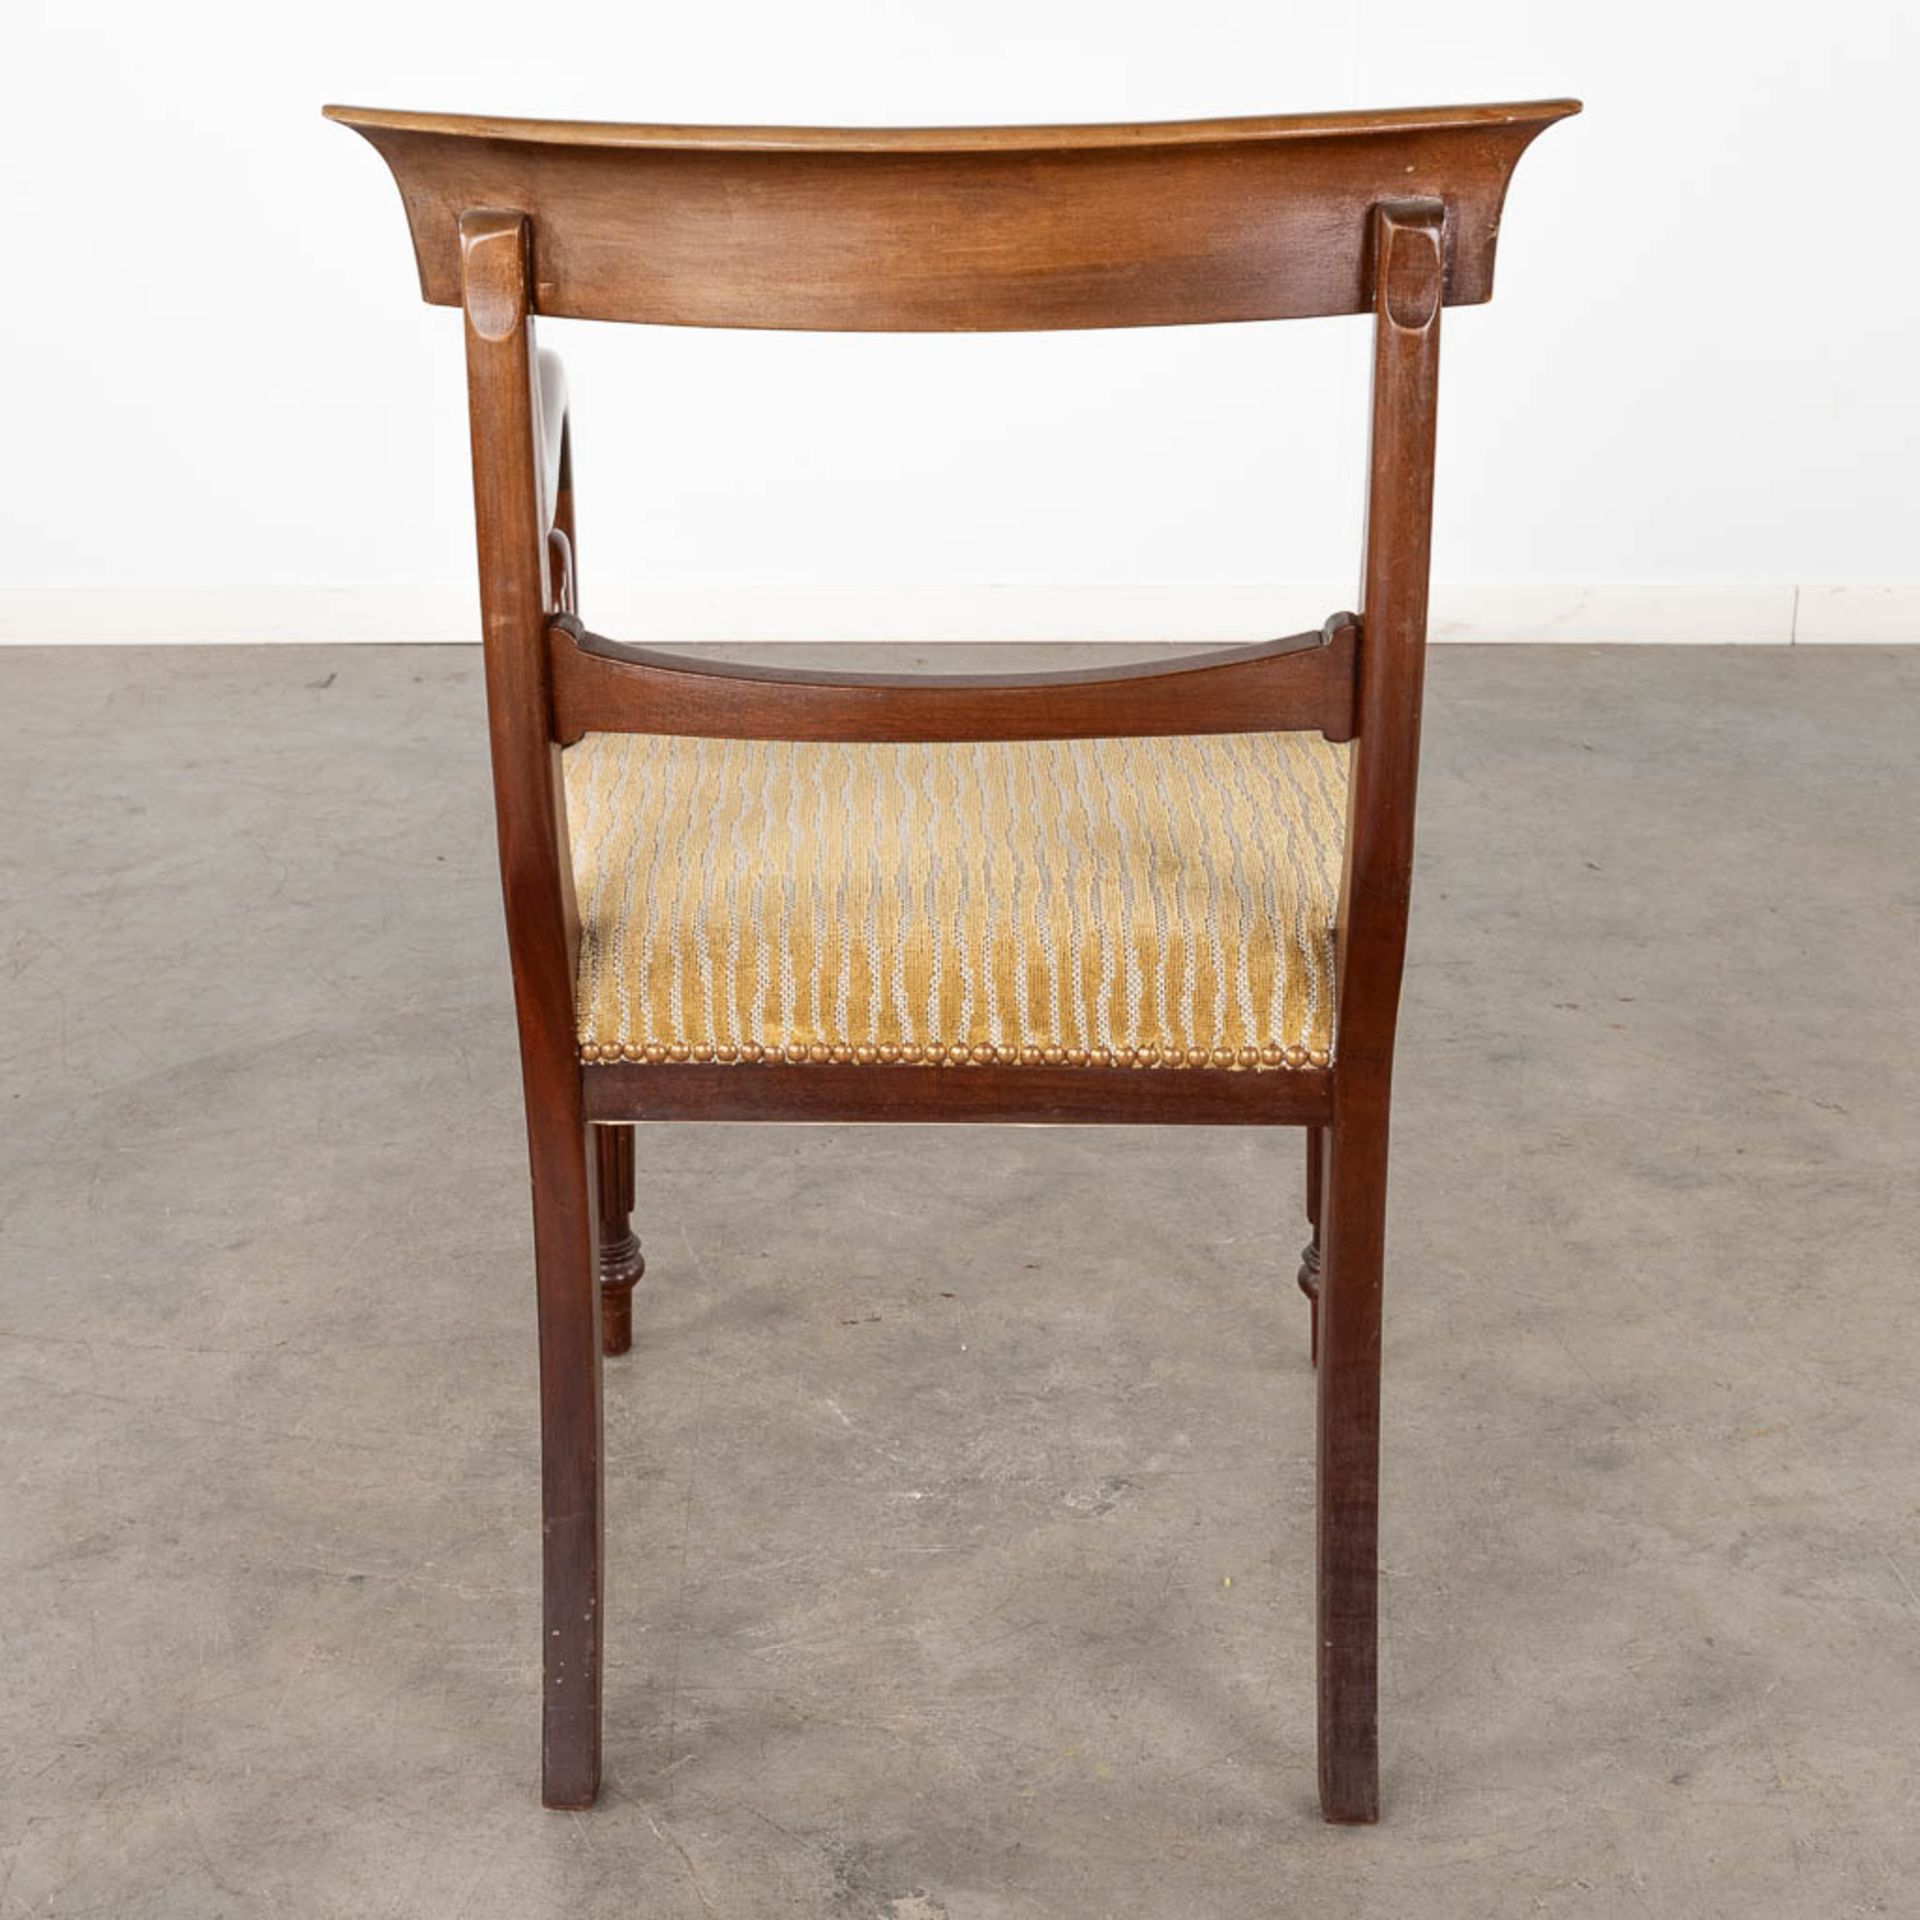 An extendible table, 6 chairs and two armchairs, Mahogany. England. 20th C. (D:144 x W:144 x H:75 cm - Image 16 of 22